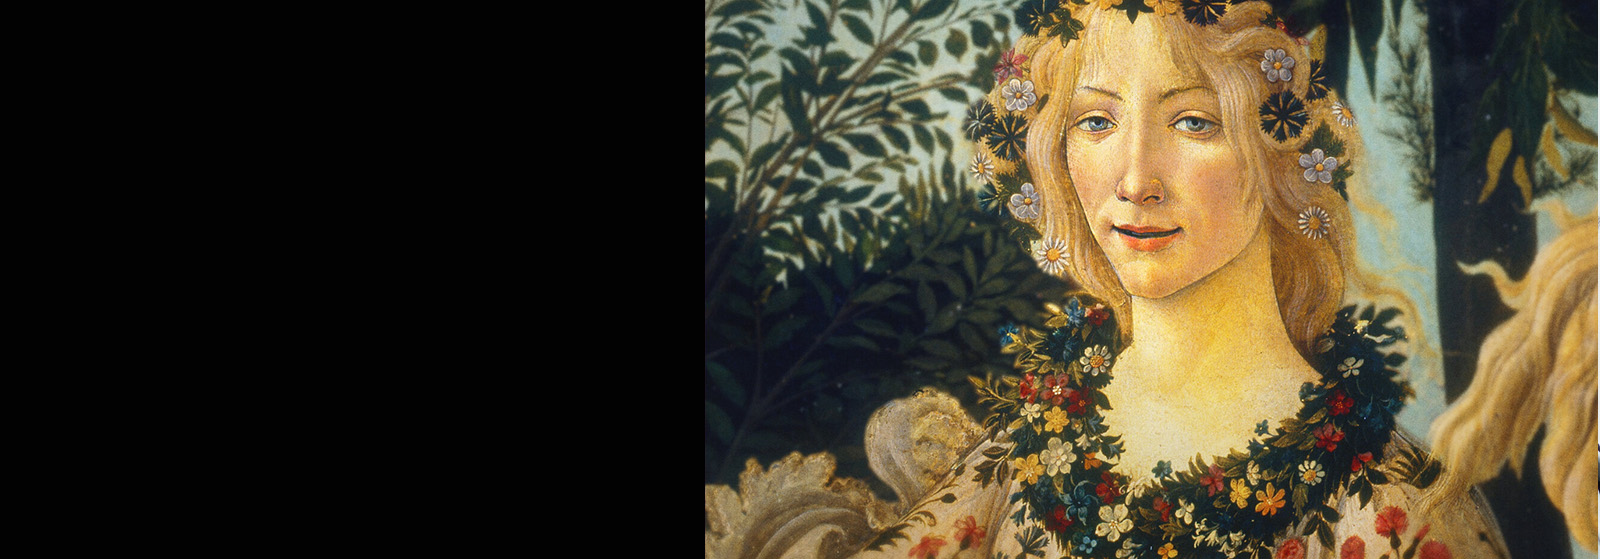 Art on Screen: Botticelli, Florence, and the Medici